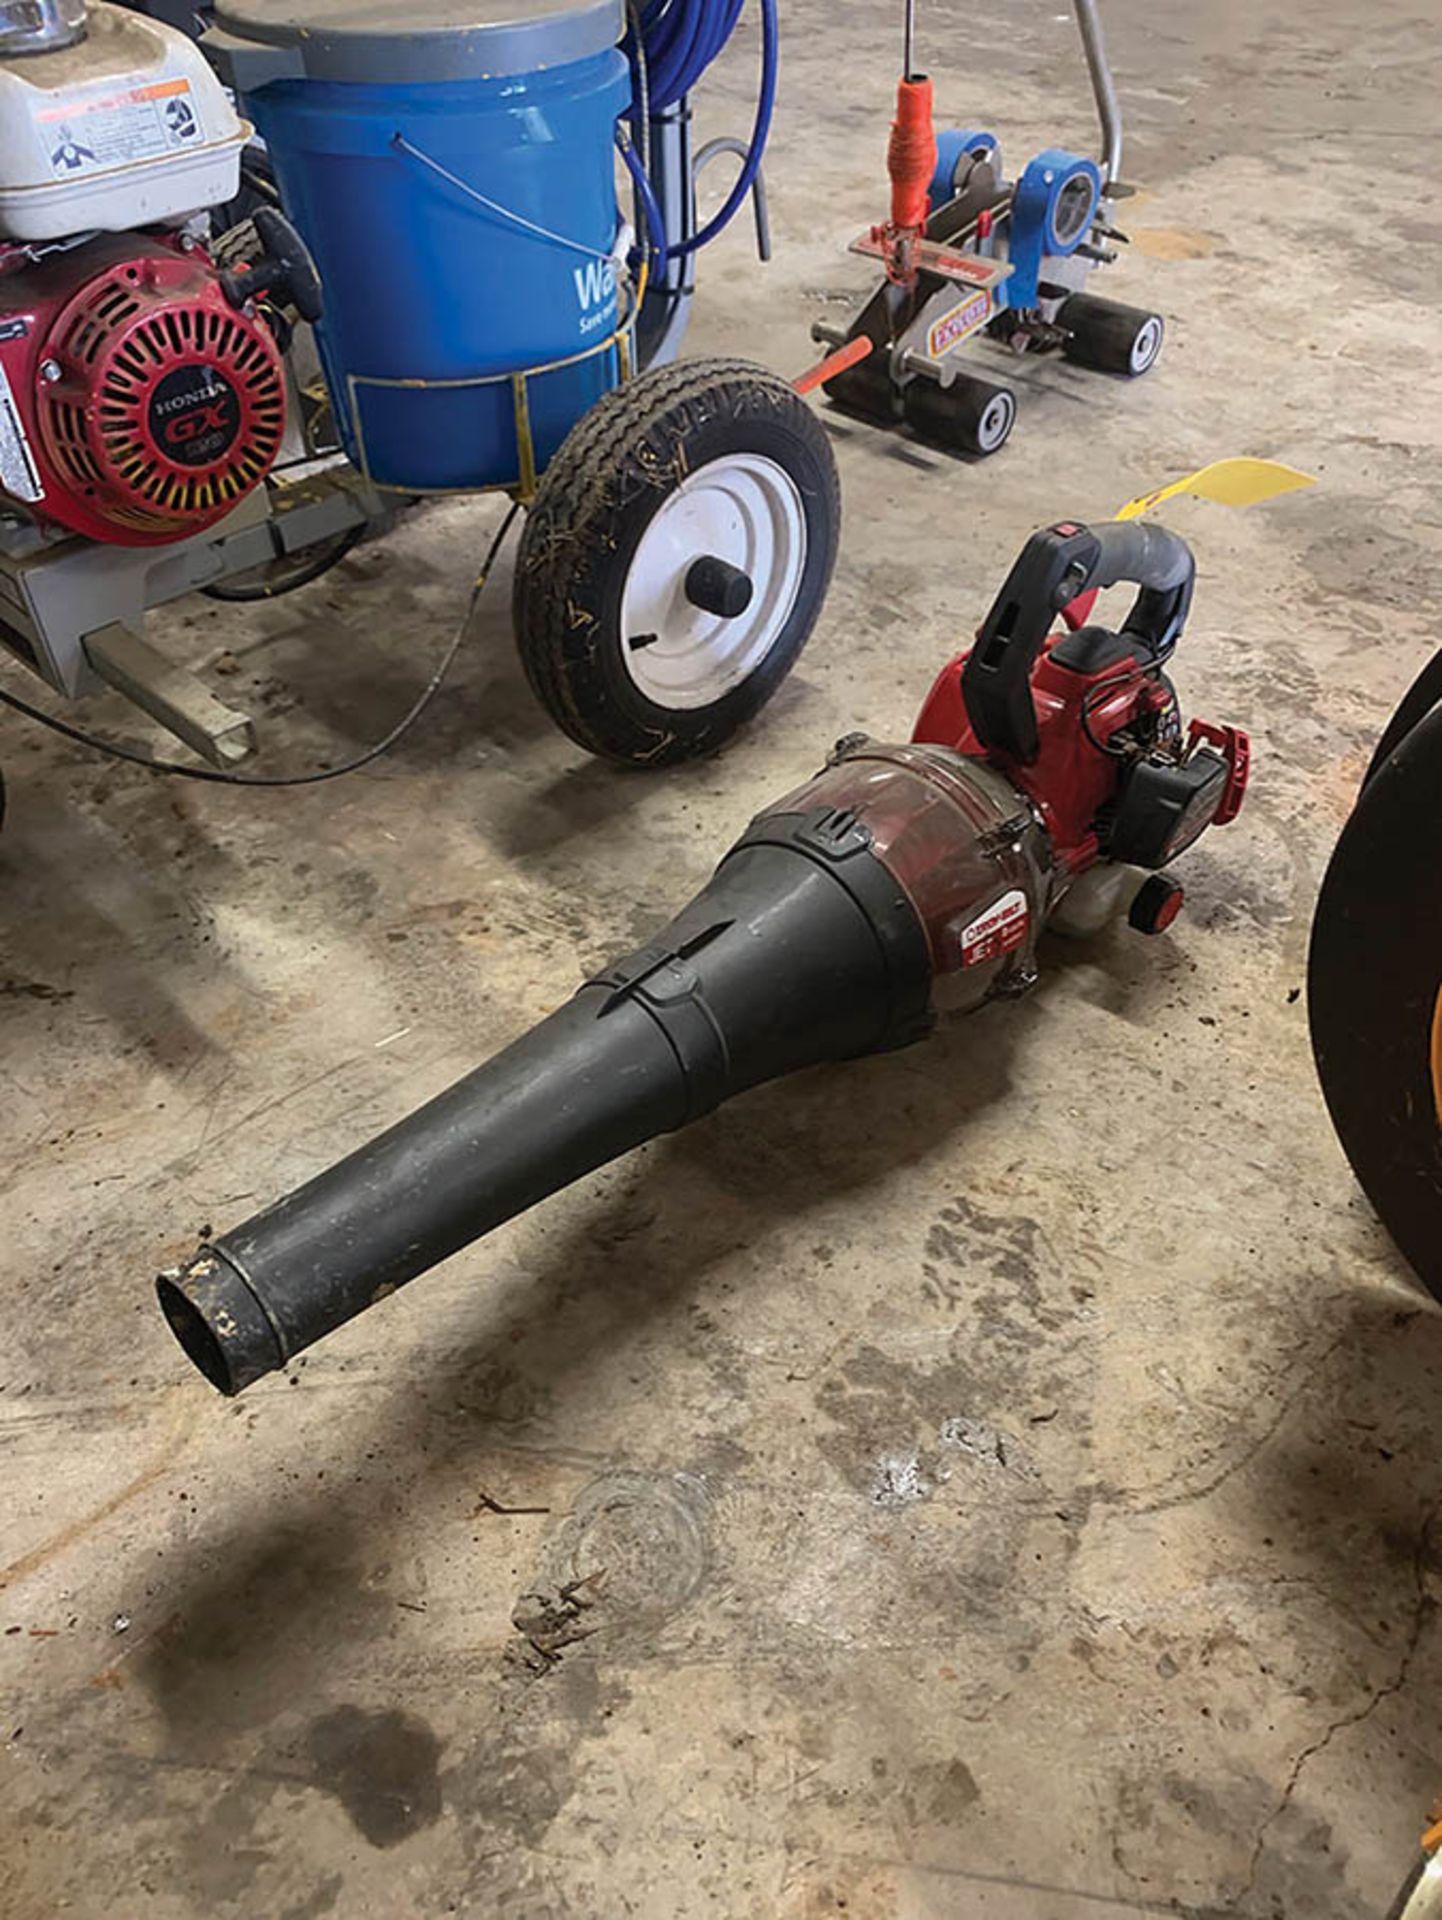 TROY BUILT, GAS POWERED, HAND-HELD JET BLOWER